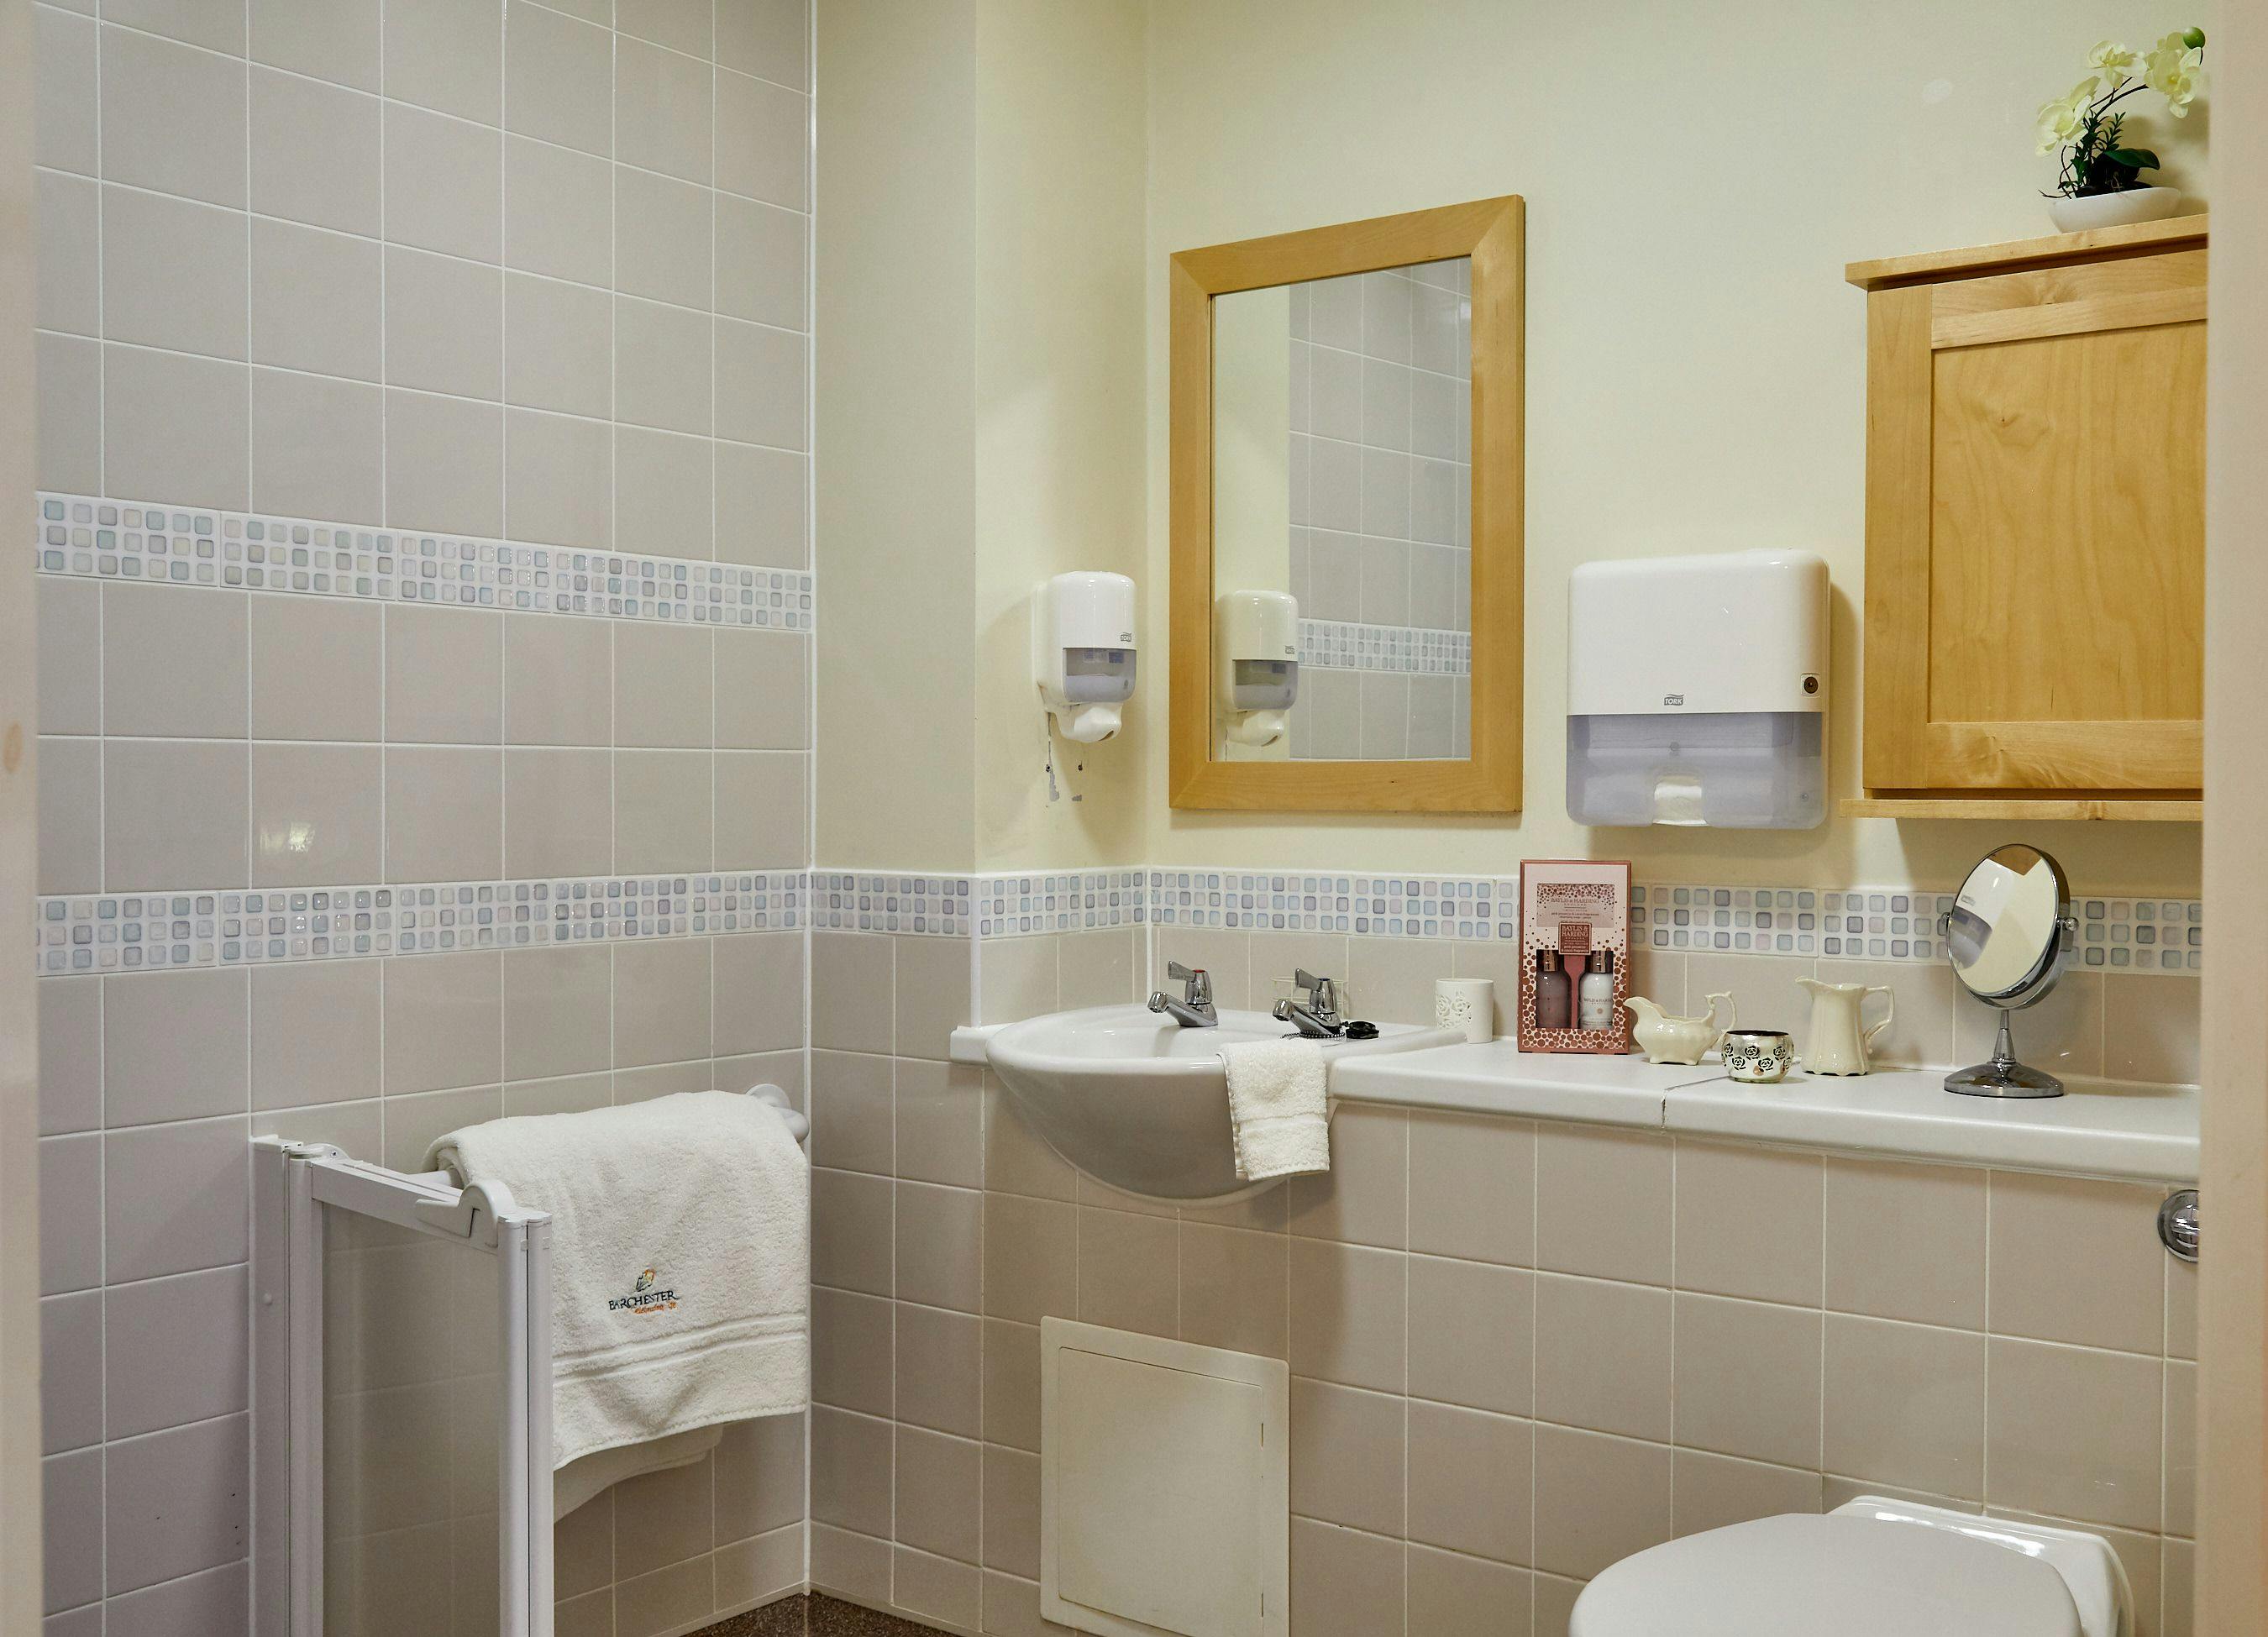 Bathroom at Rothsay Grange Care Holme in Andover, Test Valley